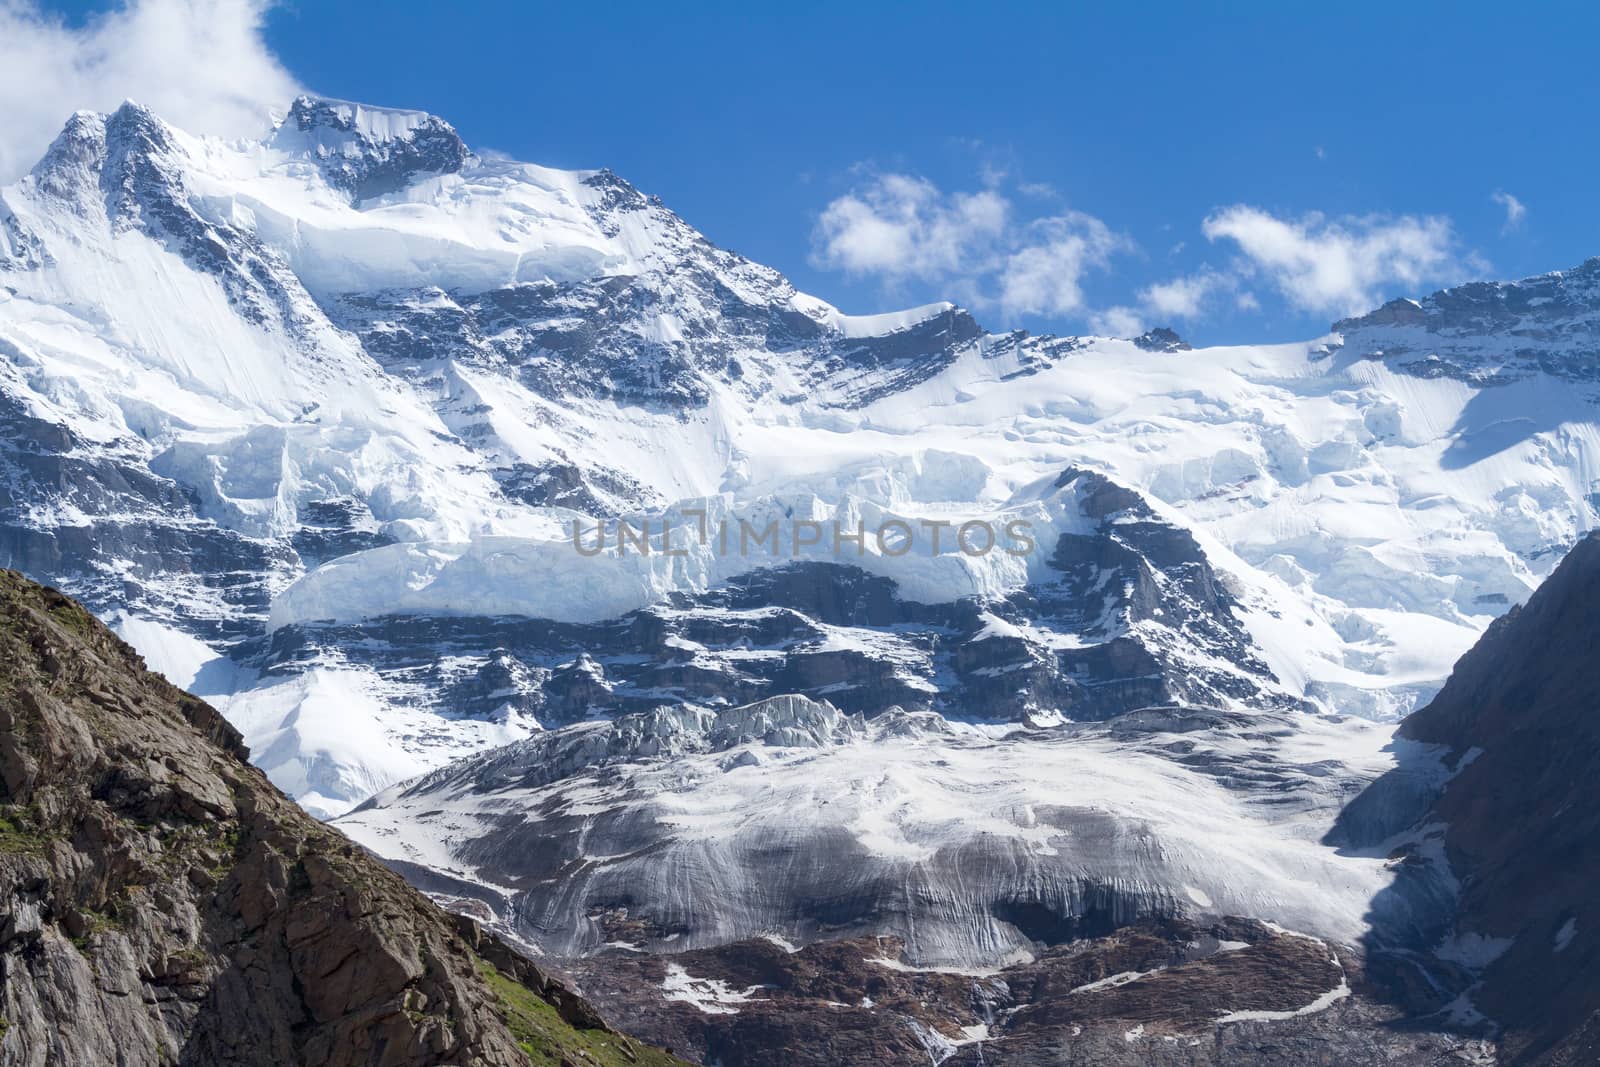 Ice, snow and rocks in the Himalayas by straannick